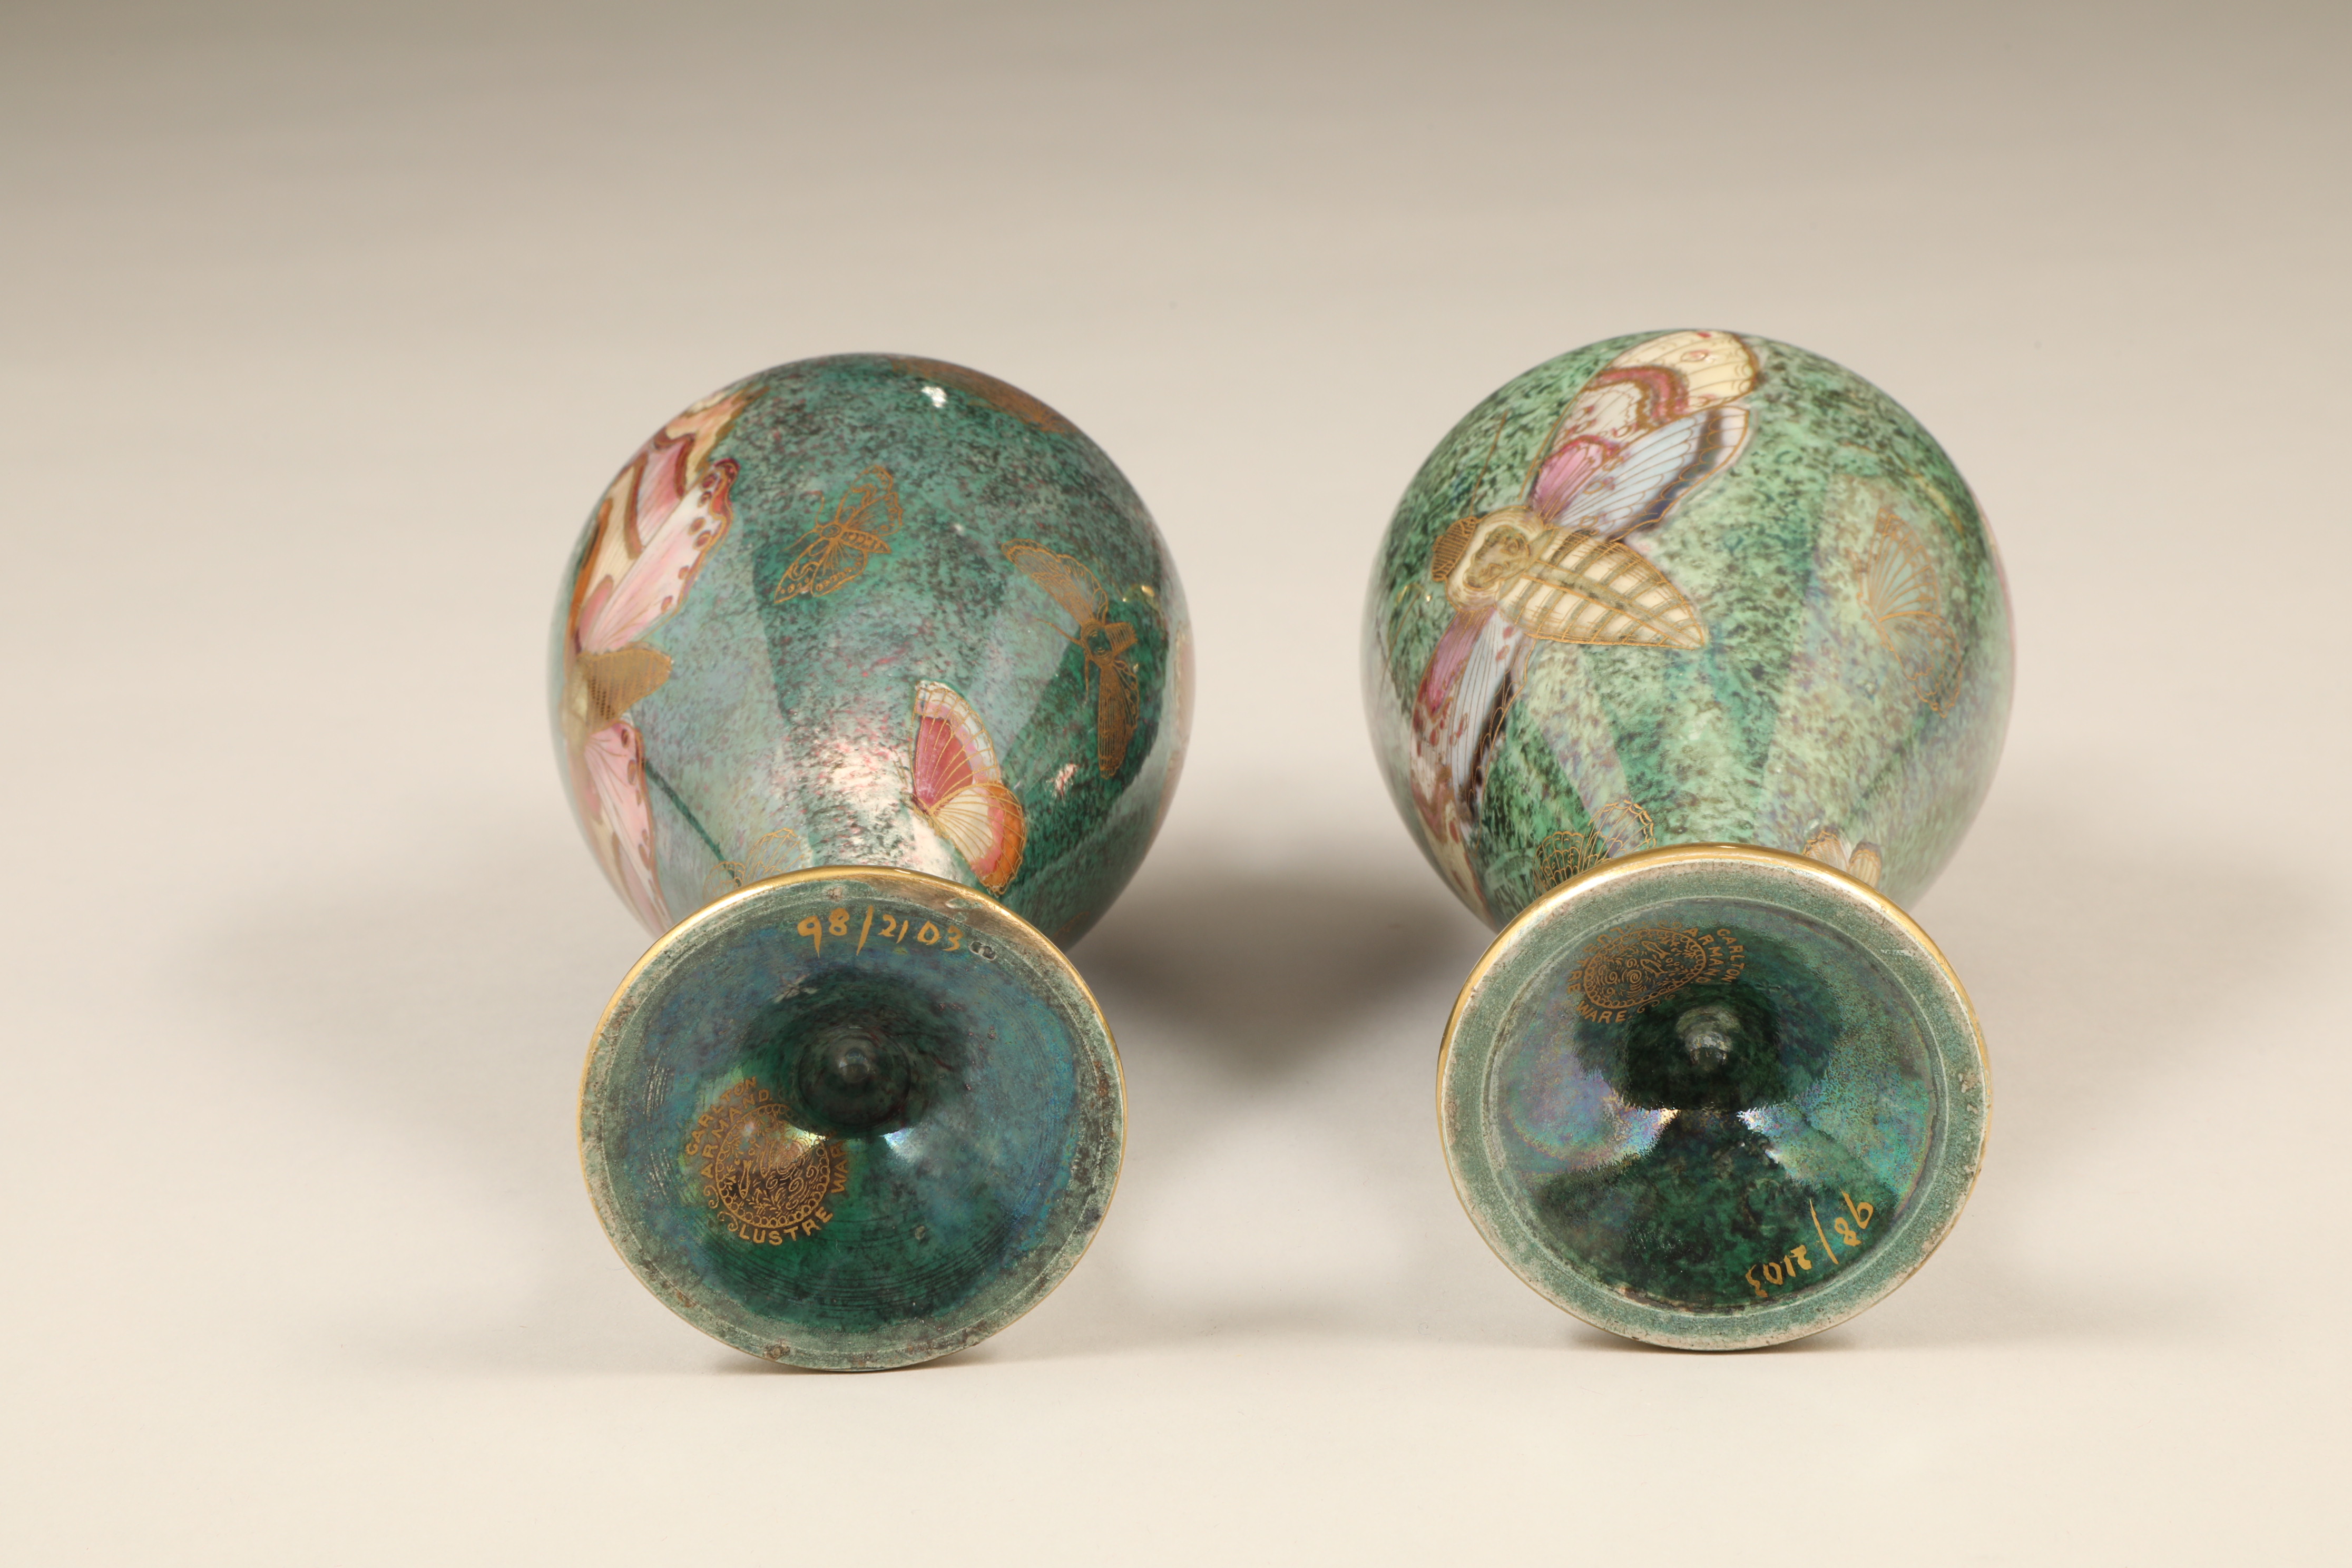 Pair of Carlton Armand lustre vases, baluster shaped mottled green ground, decorated with - Image 3 of 3